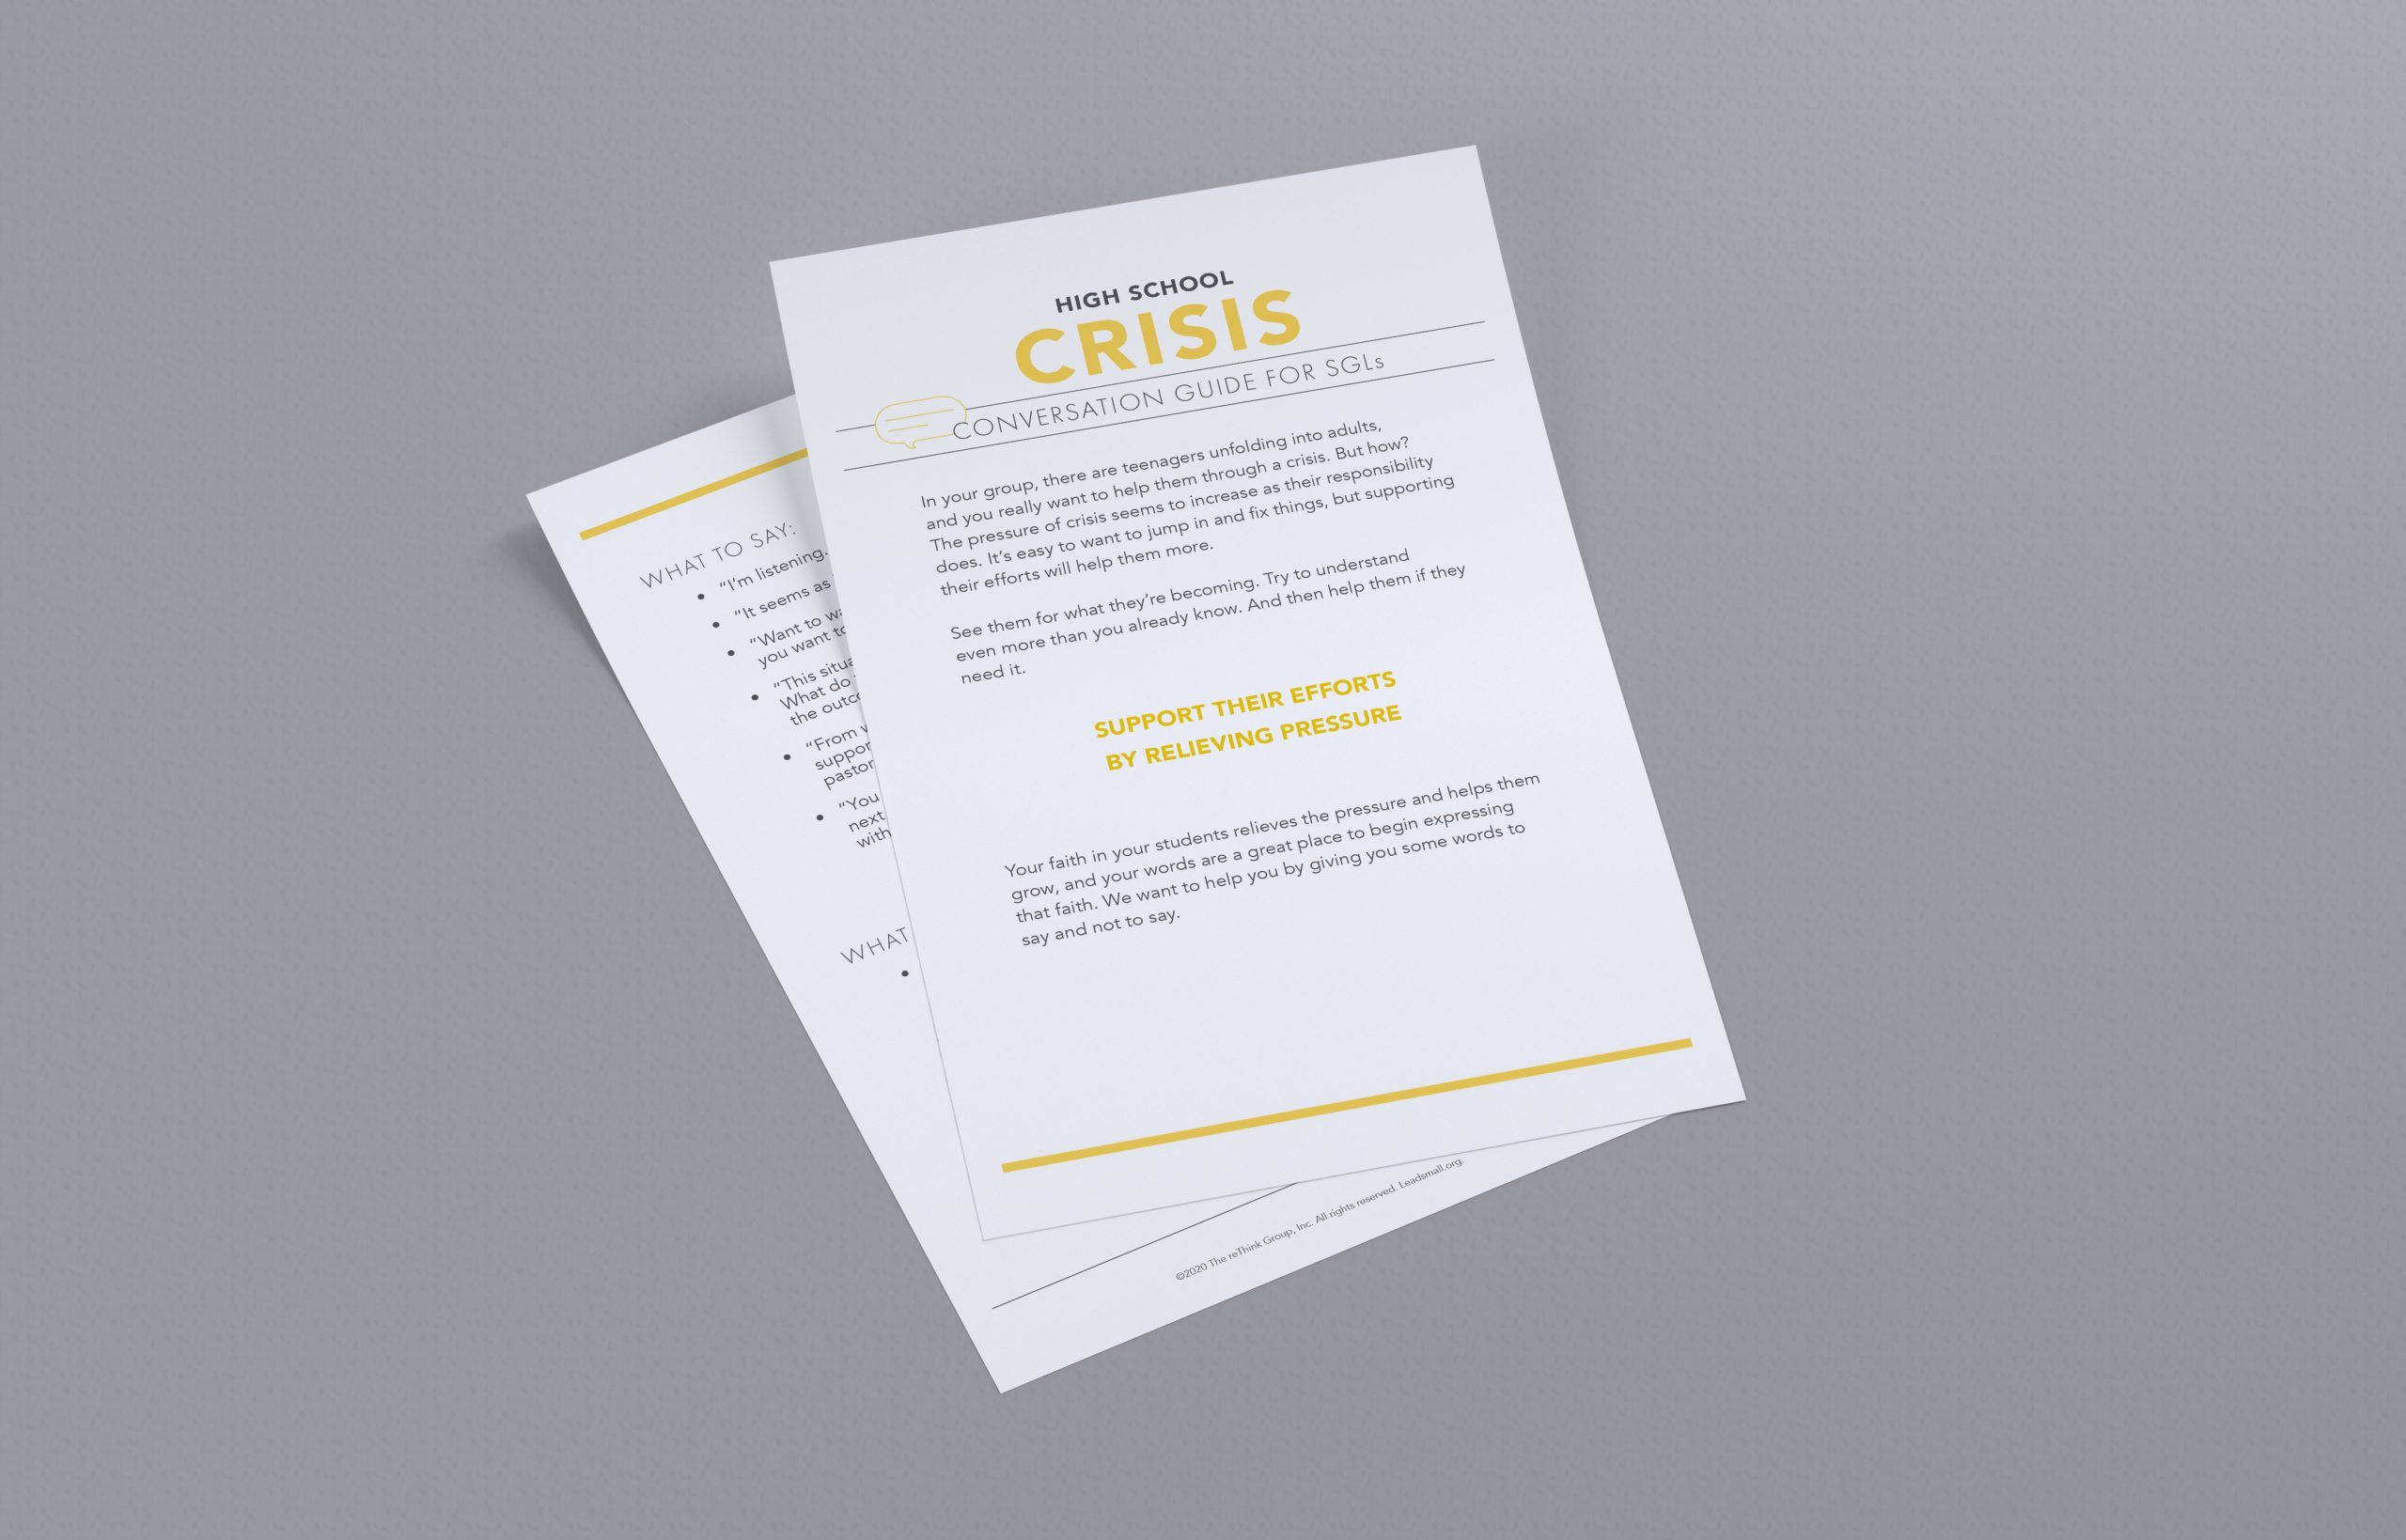 Small Group Leader Conversation Guides: Crisis